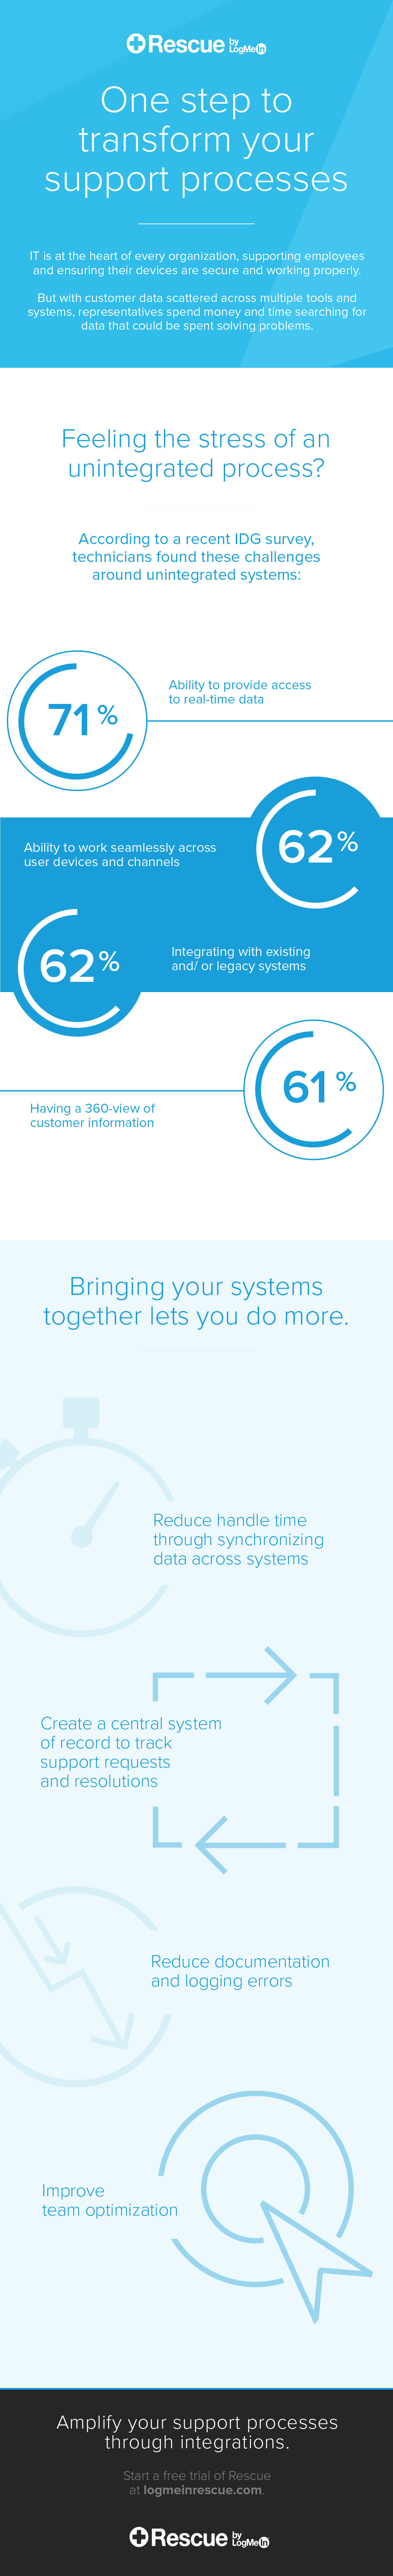 Infographic: One step to transform your support processes